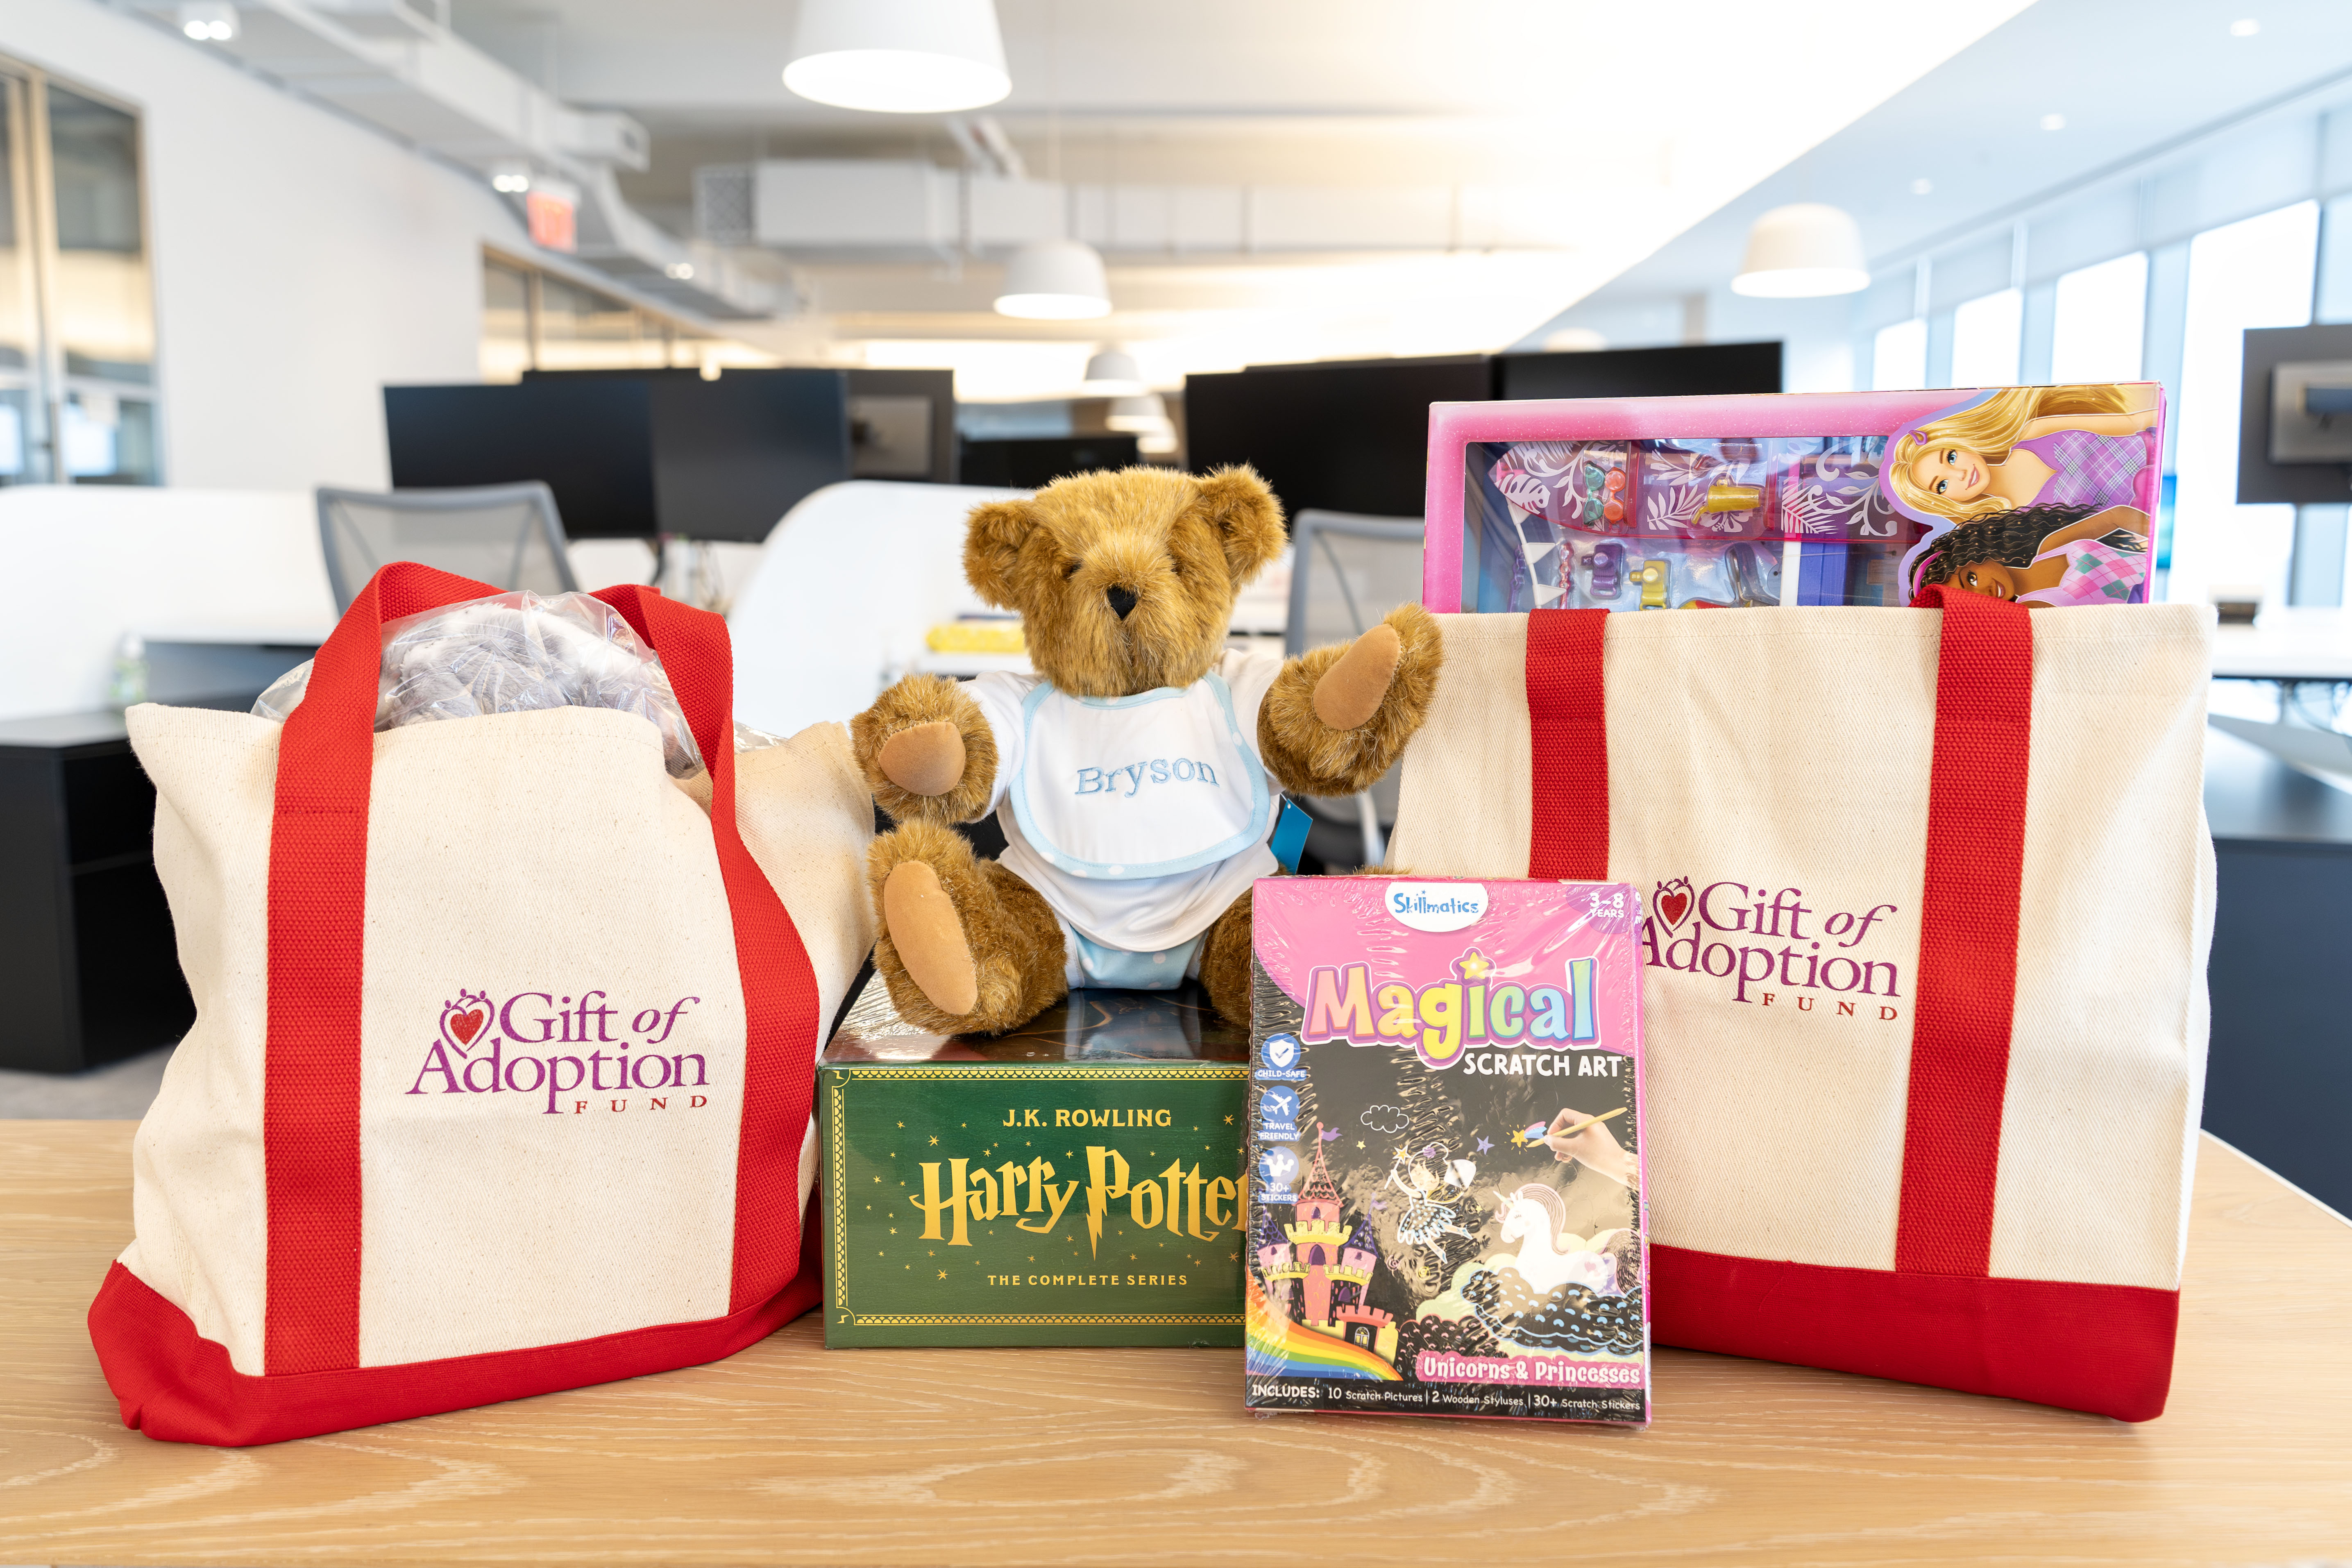 Two tote bags filled with gifts next to a teddy bear.